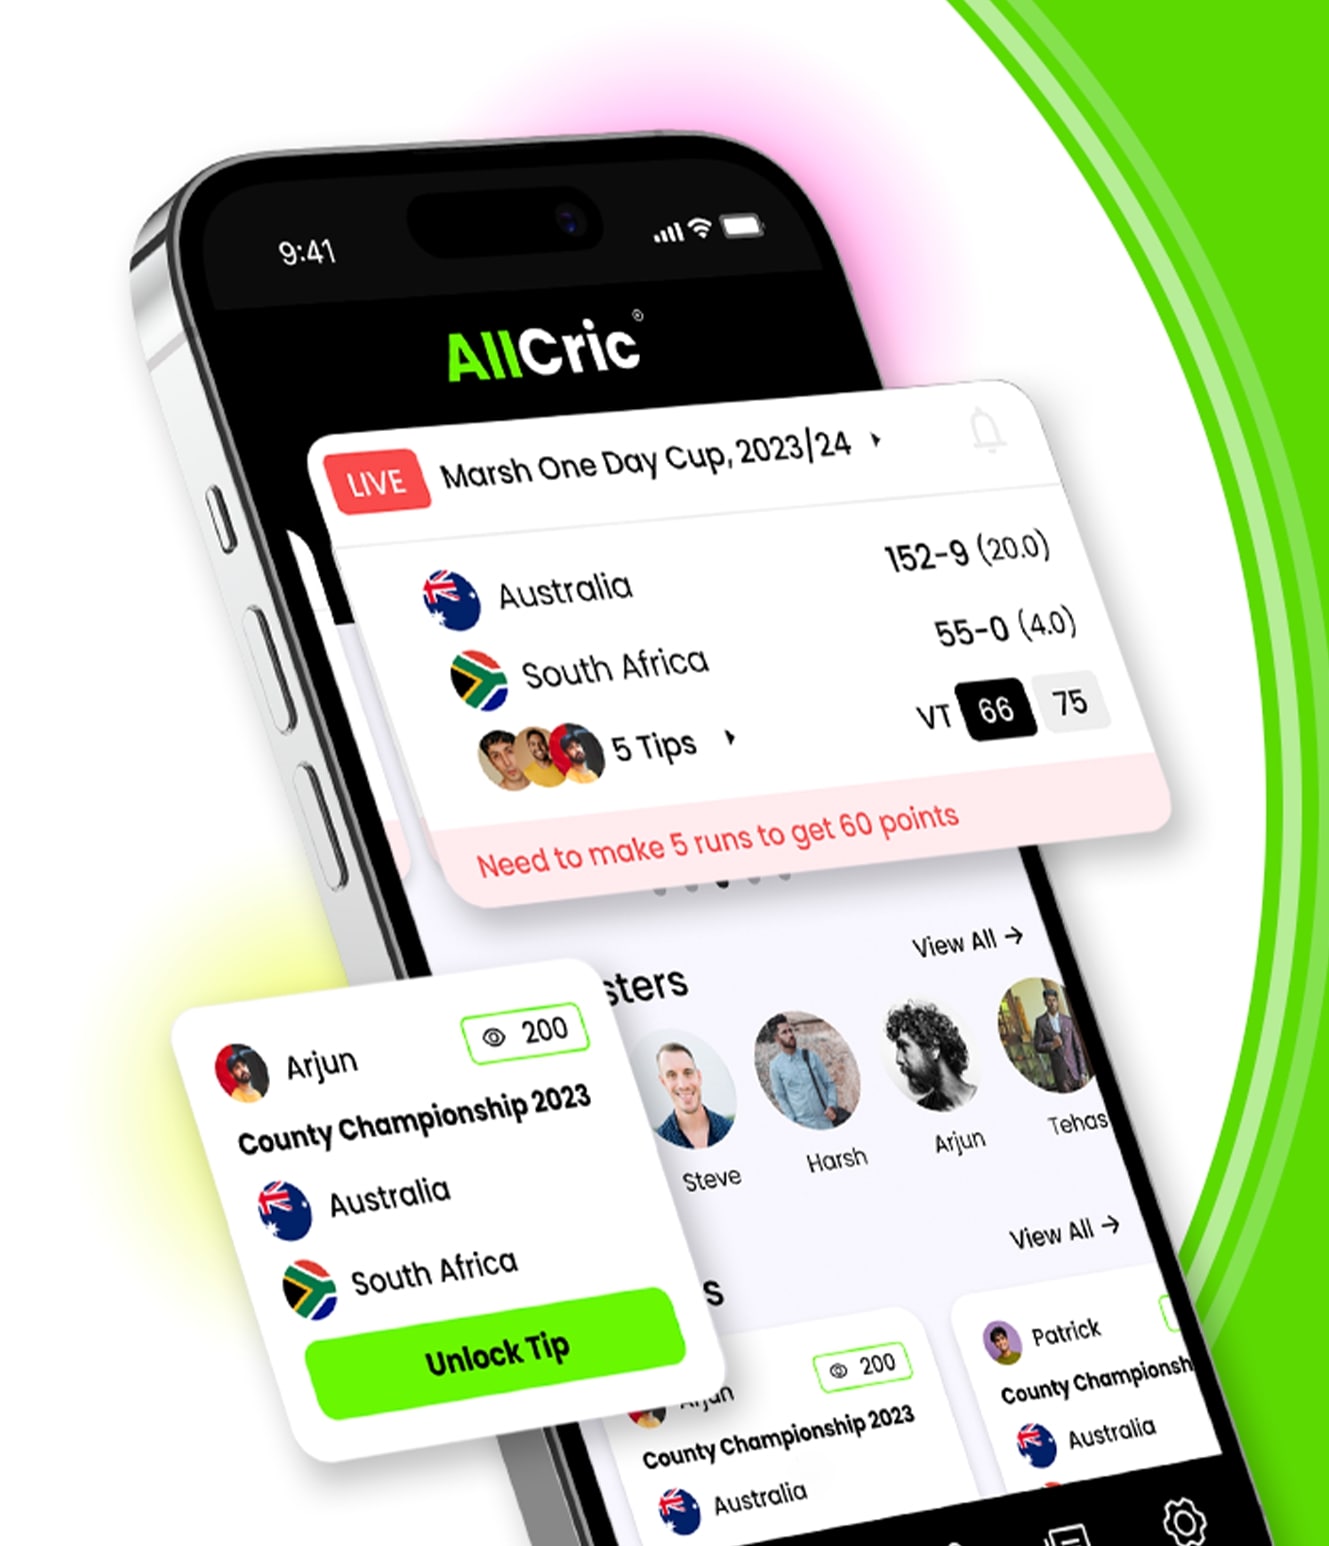 Fast Cricket Score - Stay Updated with Real-time Cricket Updates